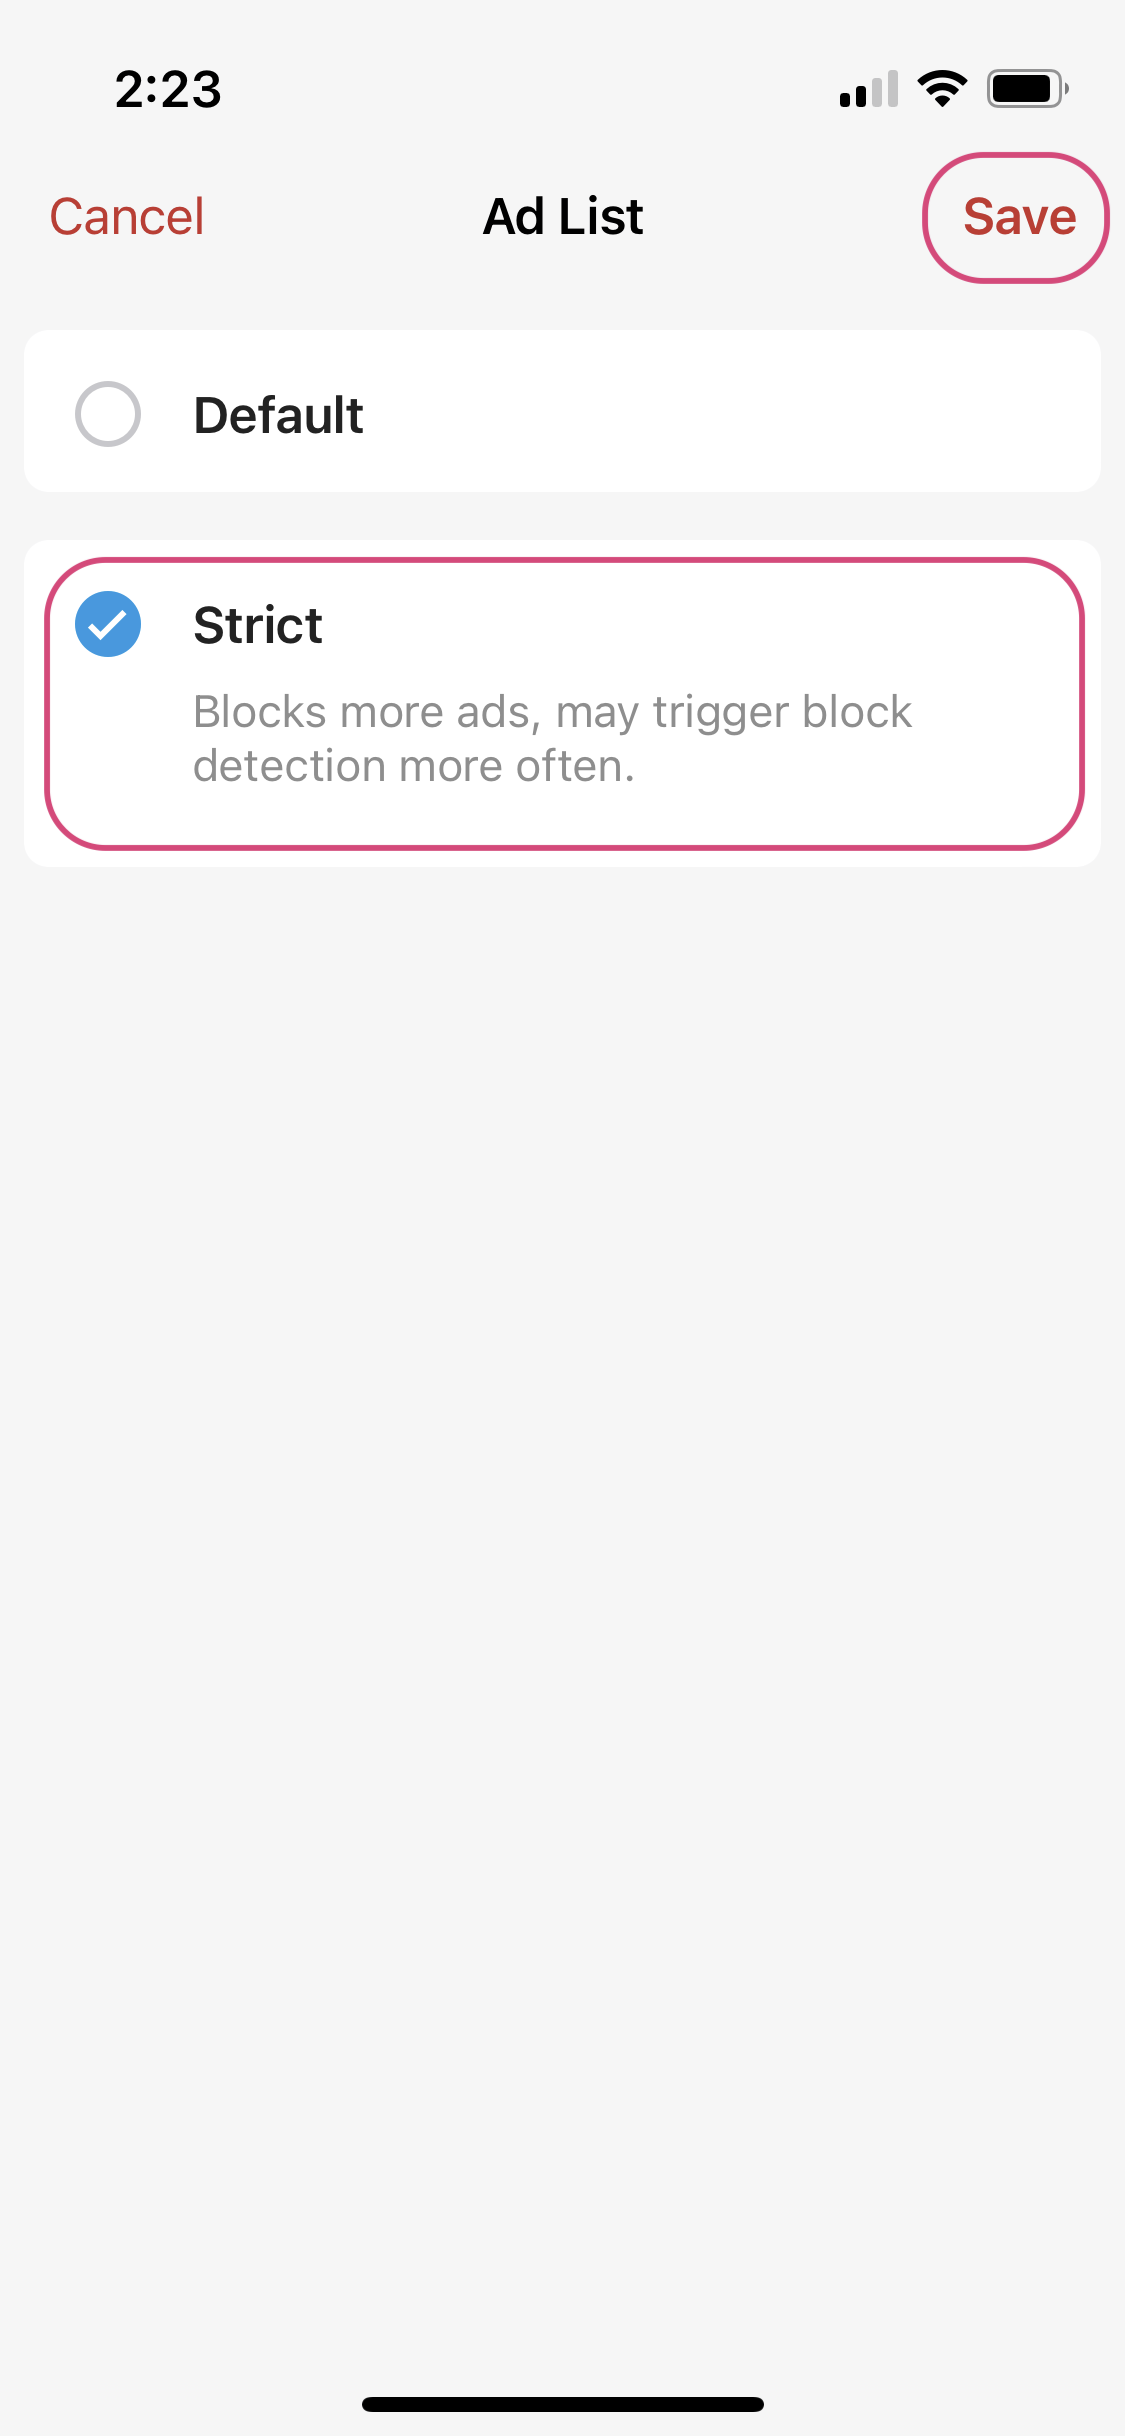 Enable the optional Strict mode to block more ads